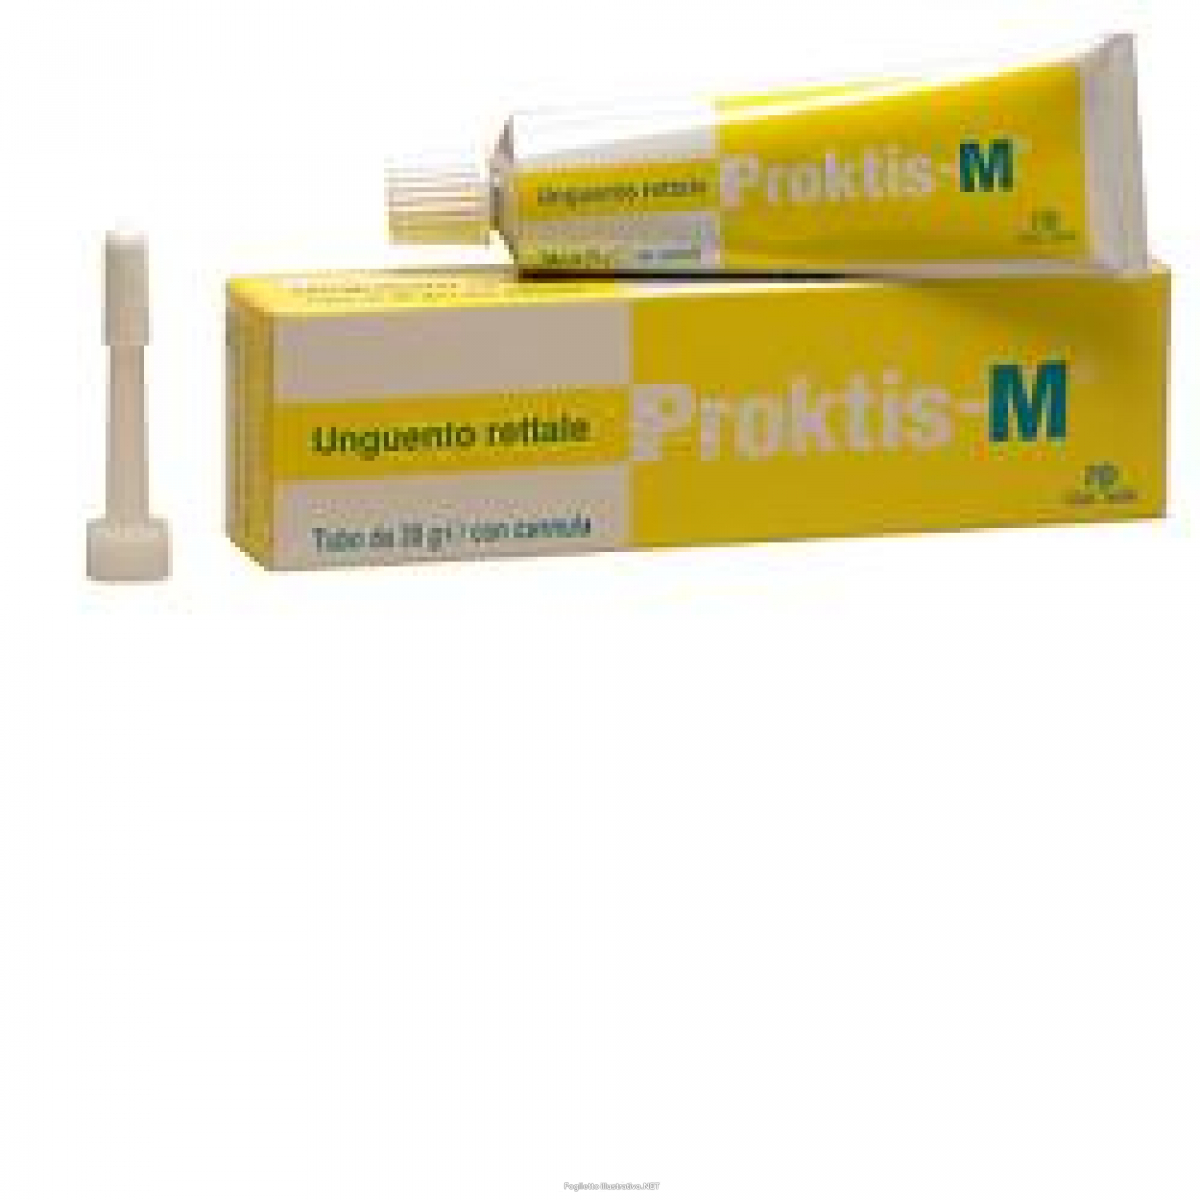  PROKTIS-M, Natural, Non-Steroidal Rectal Suppositories, with  Hyaluronic Acid, for Healing of Anus and Rectum, in Conditions Such as  Hemorrhoids and Anal fissures,10 count : Health & Household